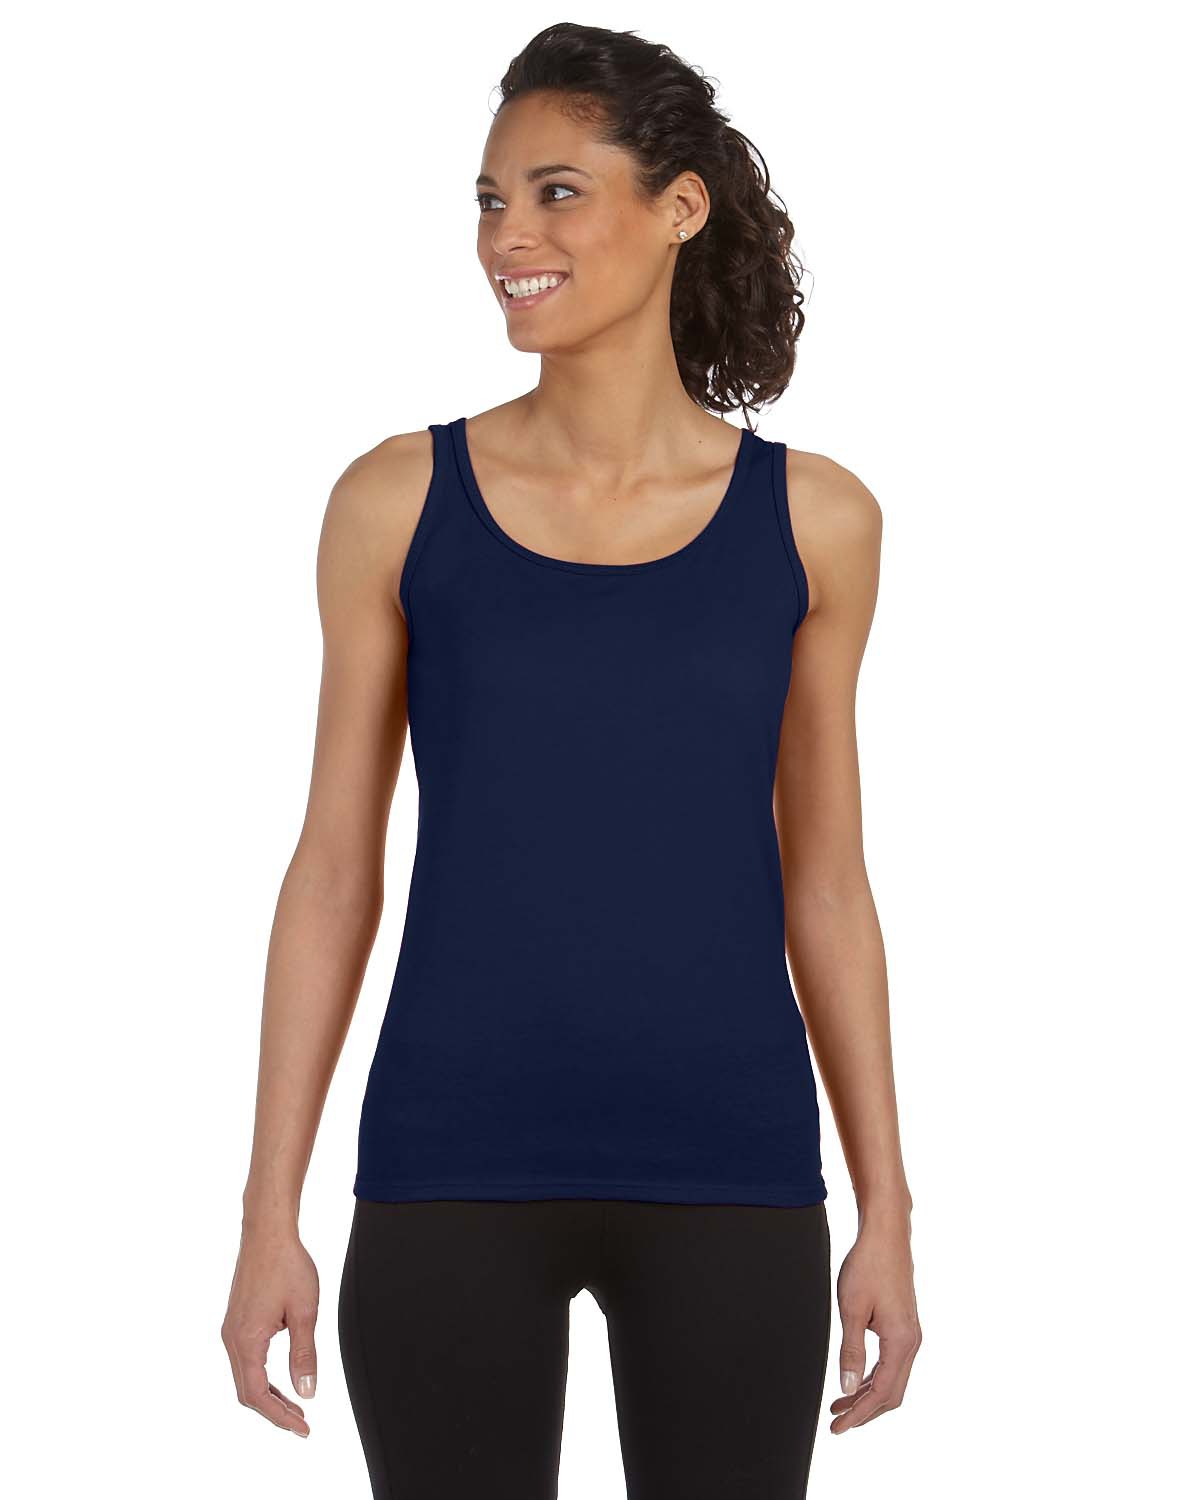 Gildan 64200L - Softstyle Women's Fitted Tank Top